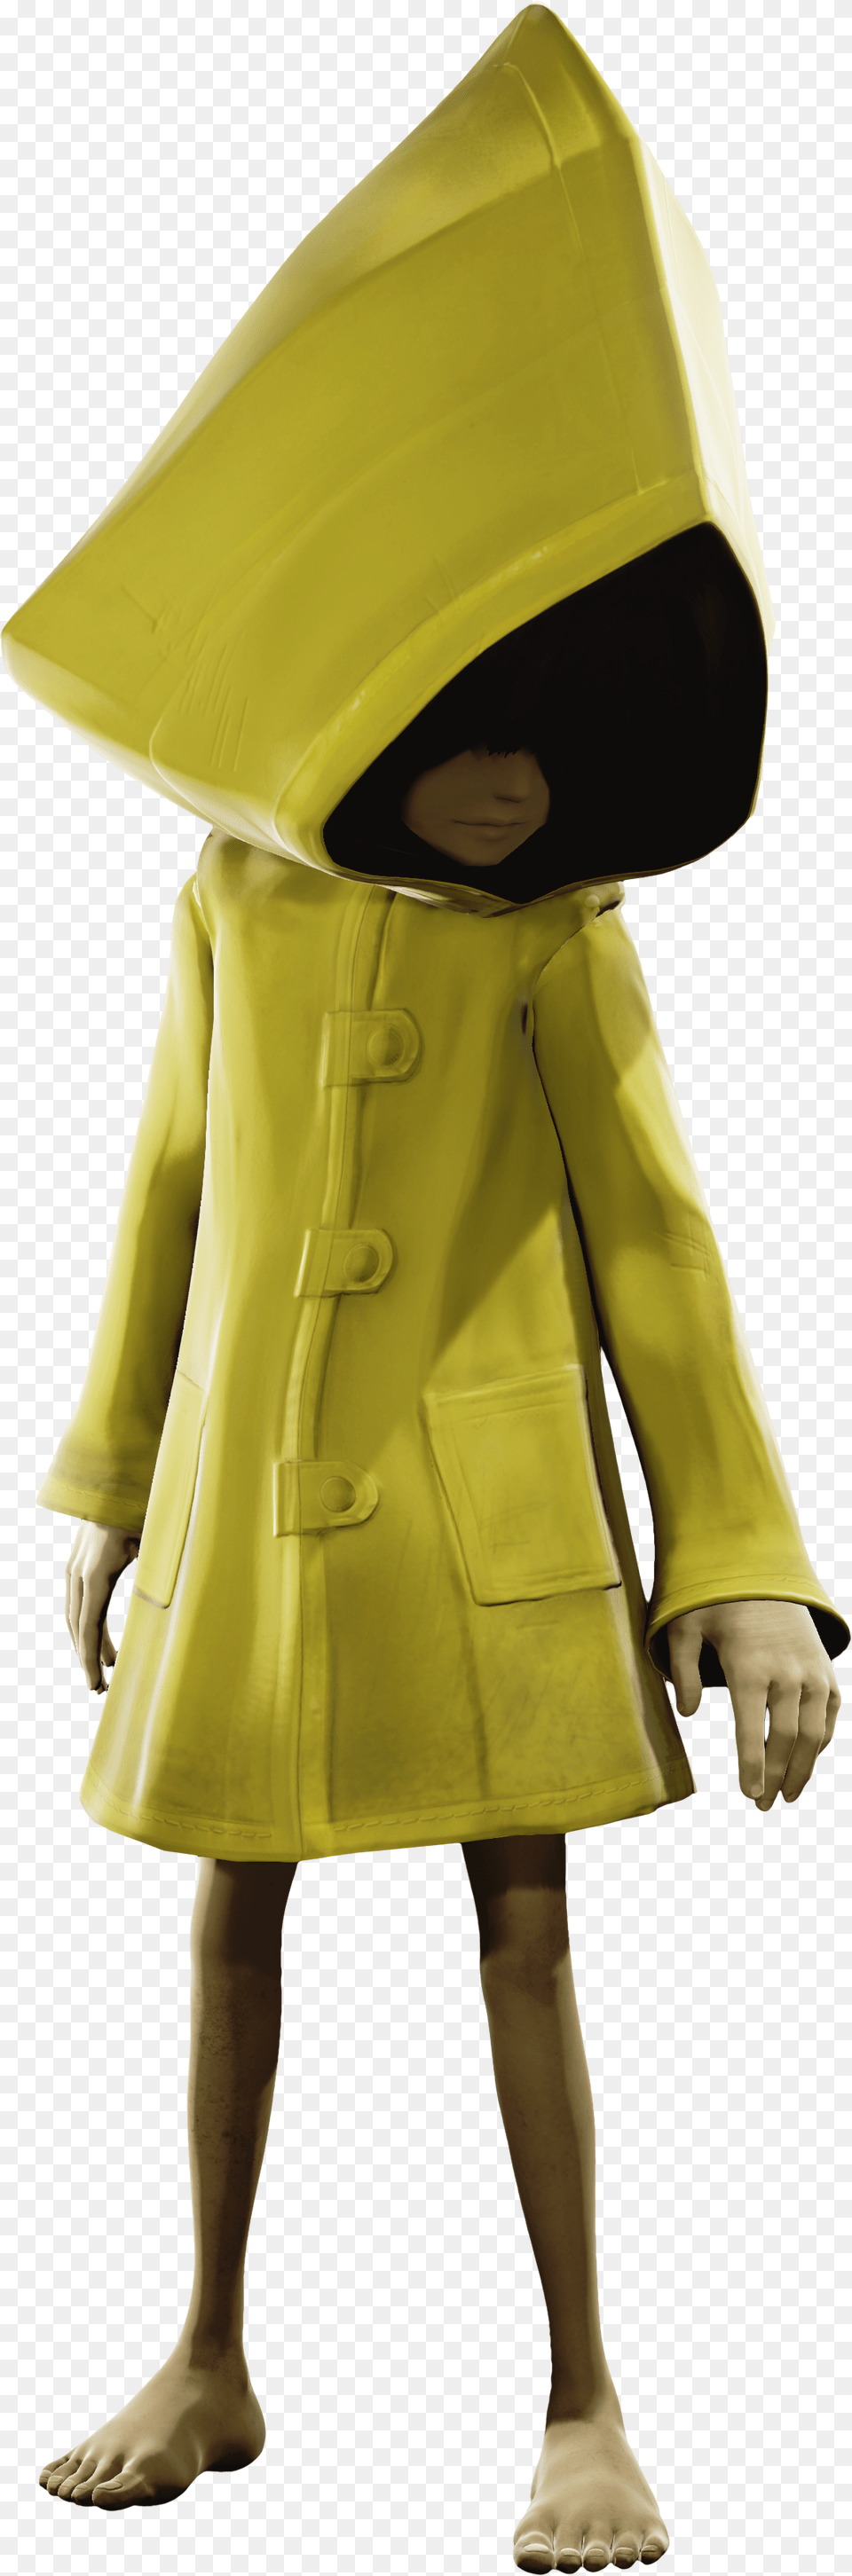 Immerse Yourself In Little Nightmares A Dark Whimsical Little Nightmares Six Costume, Clothing, Coat, Adult, Female Png Image